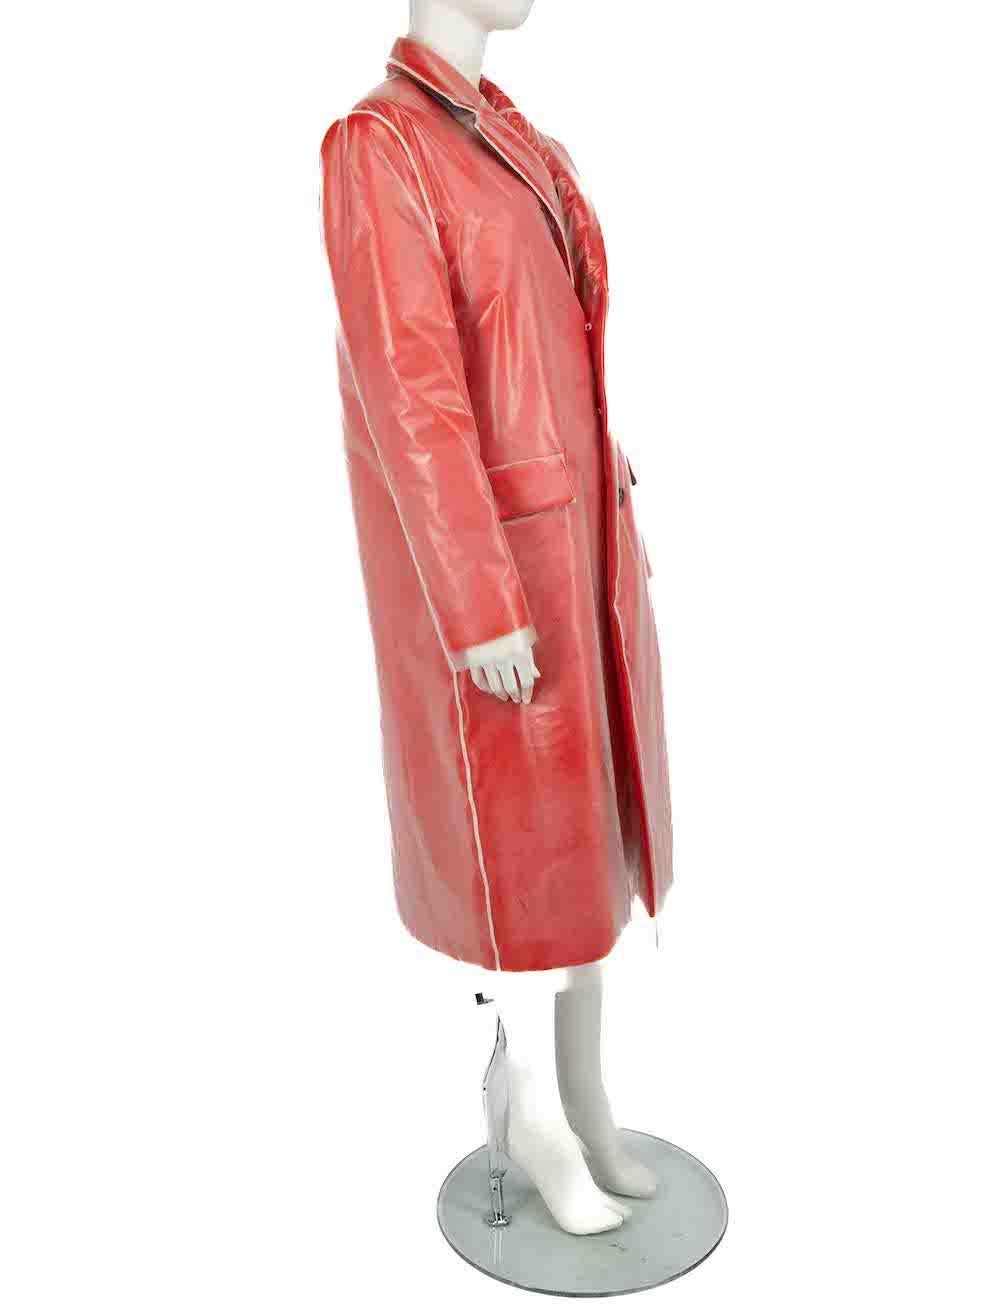 CONDITION is Never worn, with tags. No visible wear to coat is evident on this new Kwaidan Editions designer resale item.
 
Details
Red
Virgin wool
Coat
Detachable translucent layer
Button fastening
2x Side pockets
 
Made in Italy
 
Composition
100%